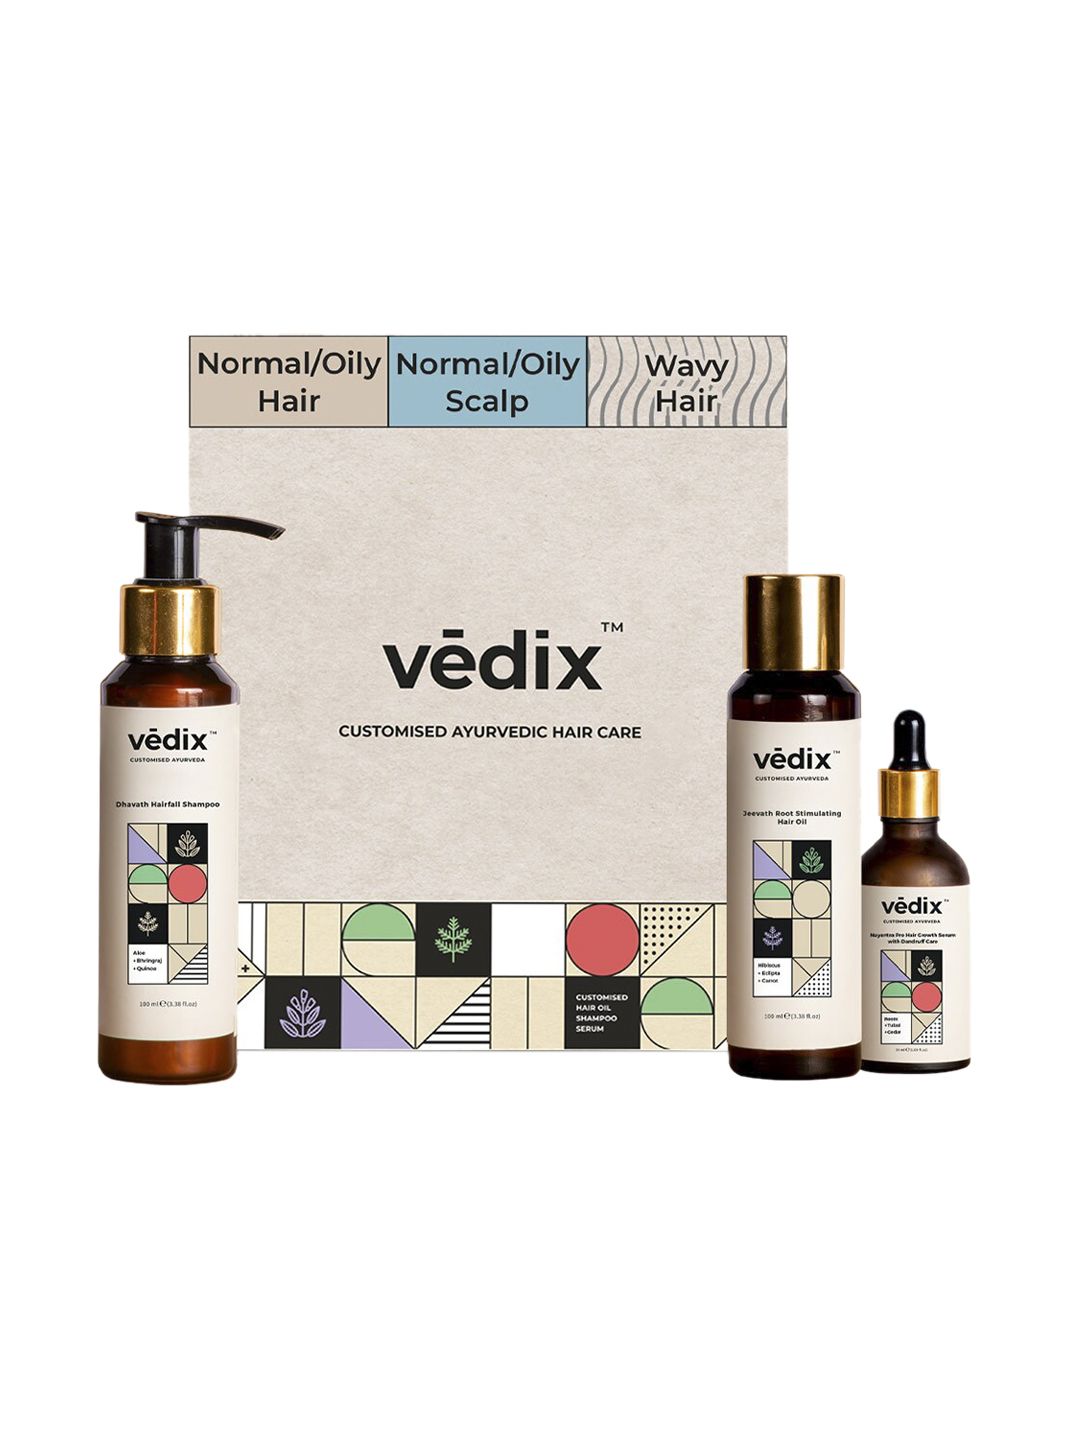 VEDIX Customized Hair Fall Control Regimen for Dry Hair - Normal Oily Scalp + Wavy Hair Price in India